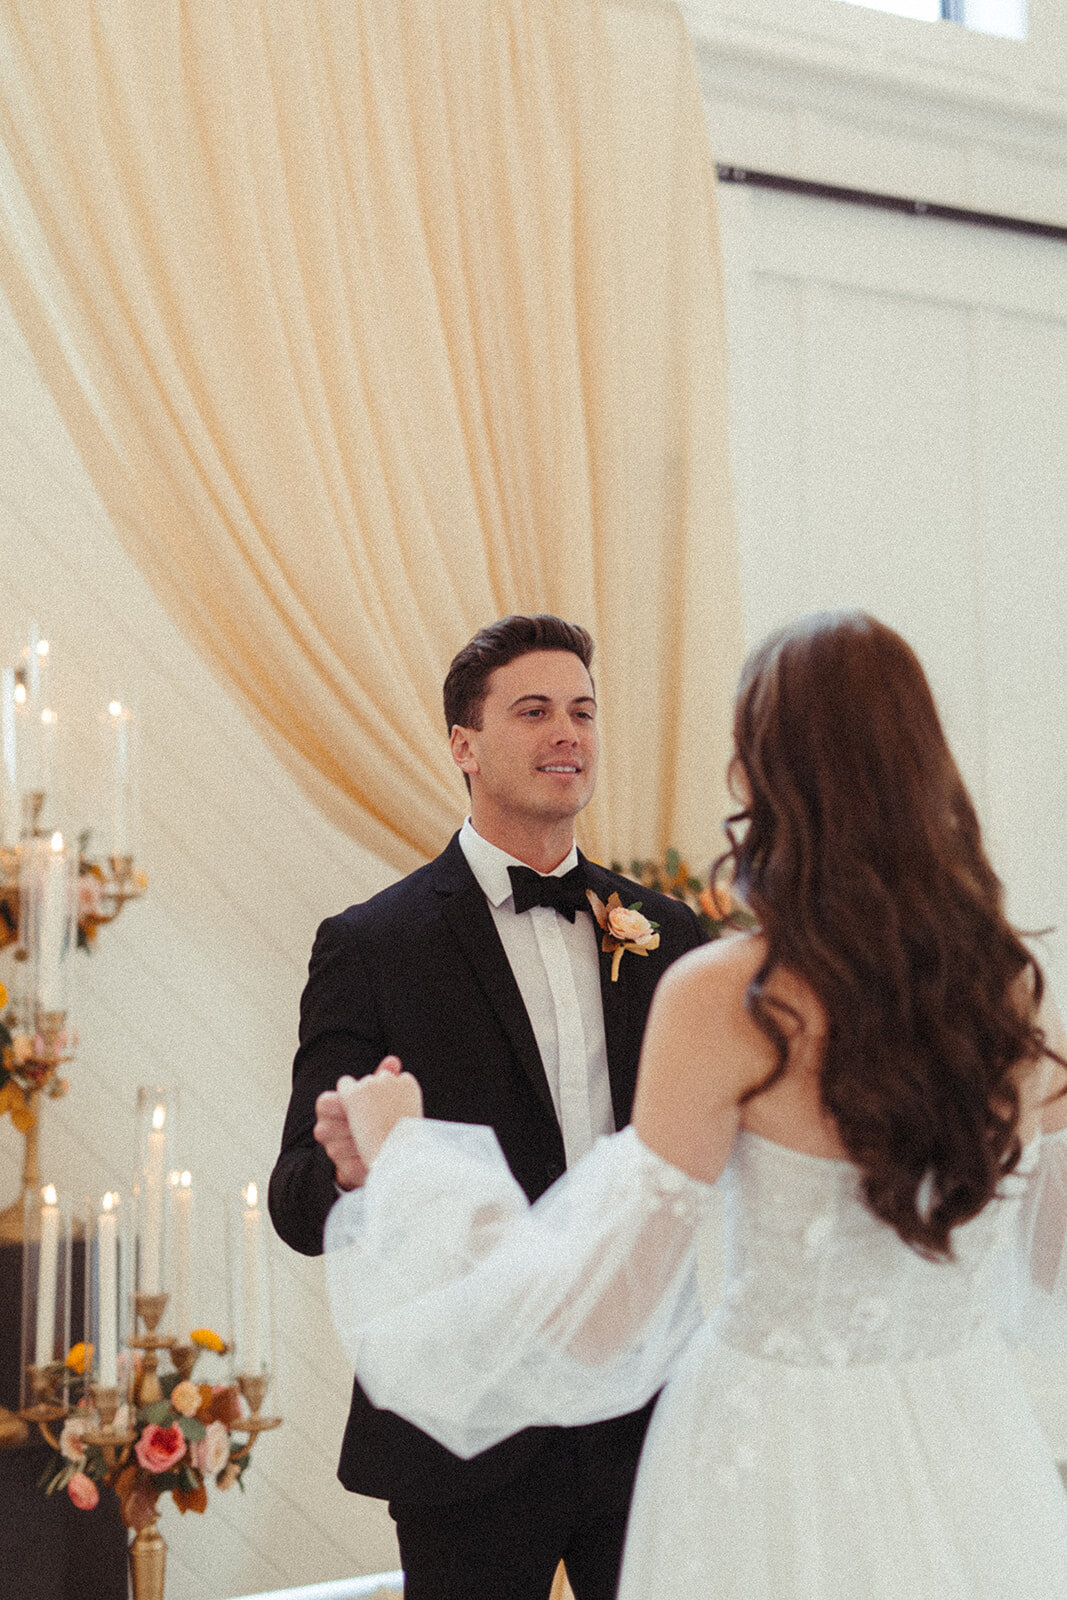 Bride and groom wearing a black tuxedo and white wedding gown dance in a room filled with flowers arrangements and candles